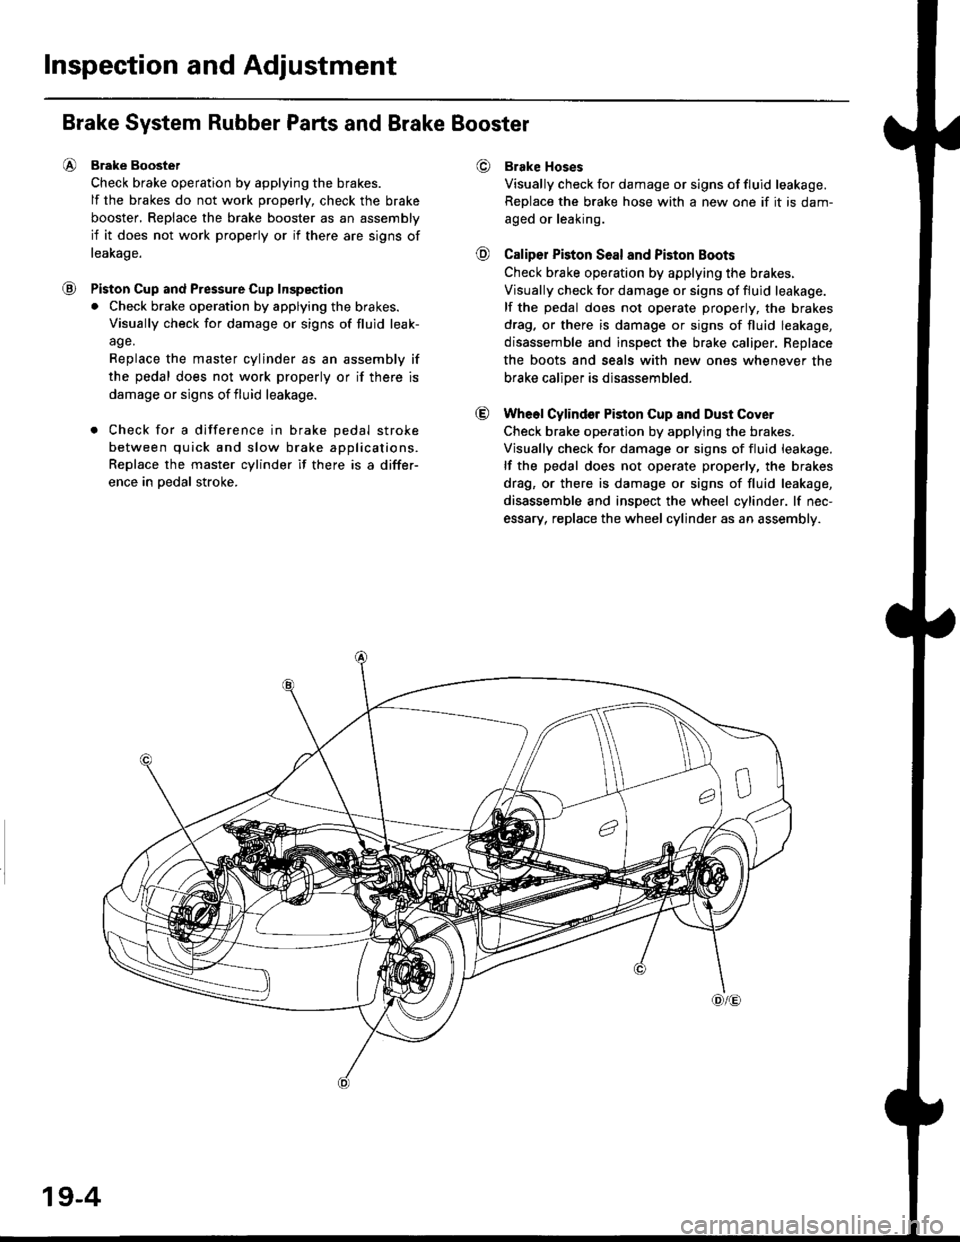 HONDA CIVIC 1999 6.G Workshop Manual Inspection and Adjustment
€)
@
@
@
Brake System Rubber Parts and Brake Booster
Brake Boostet
Check brake operation by applying the brakes.
lf the brakes do not work properly, check the brake
booster